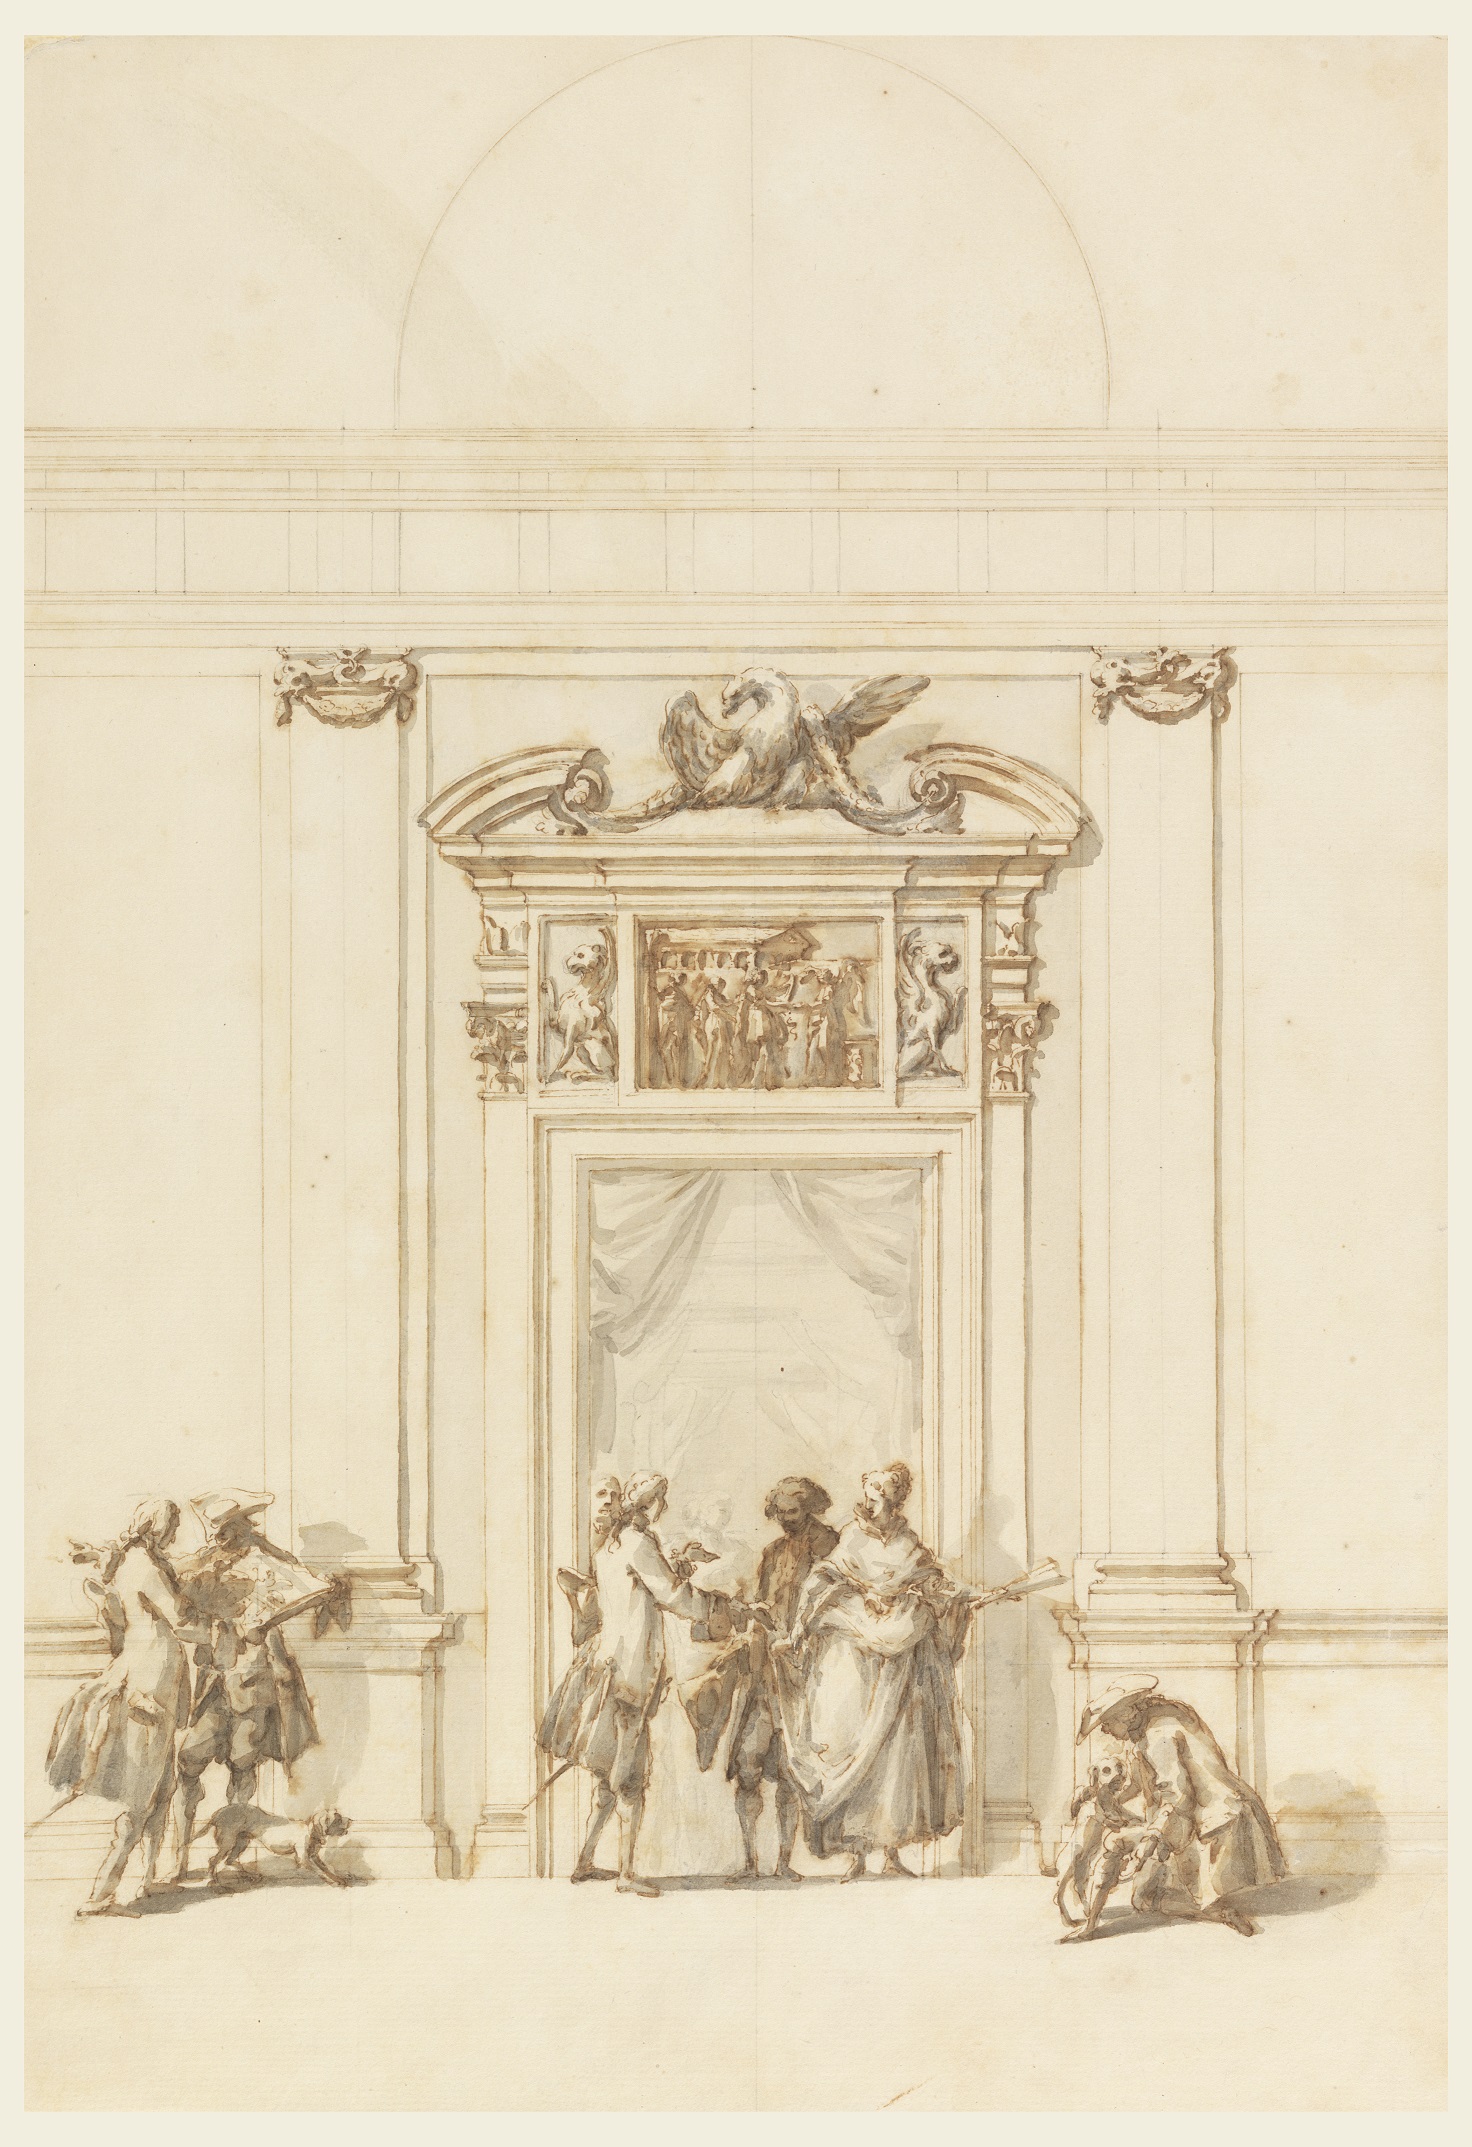 Drawing, Design for a Doorway in the Villa Albani, Rome, 1755-1756; Designed by Carlo Marchionni (Italian, 1702-1786); Pen and brown ink, brush with brown and grey wash, graphite on cream laid paper; 16 7/16 x 11 3/8 in. (417 x 289mm); Museum purchase through gift of various donors, 1901-39-2178; Cooper Hewitt, Smithsonian Museum; Matt Flynn © Smithsonian Institution.